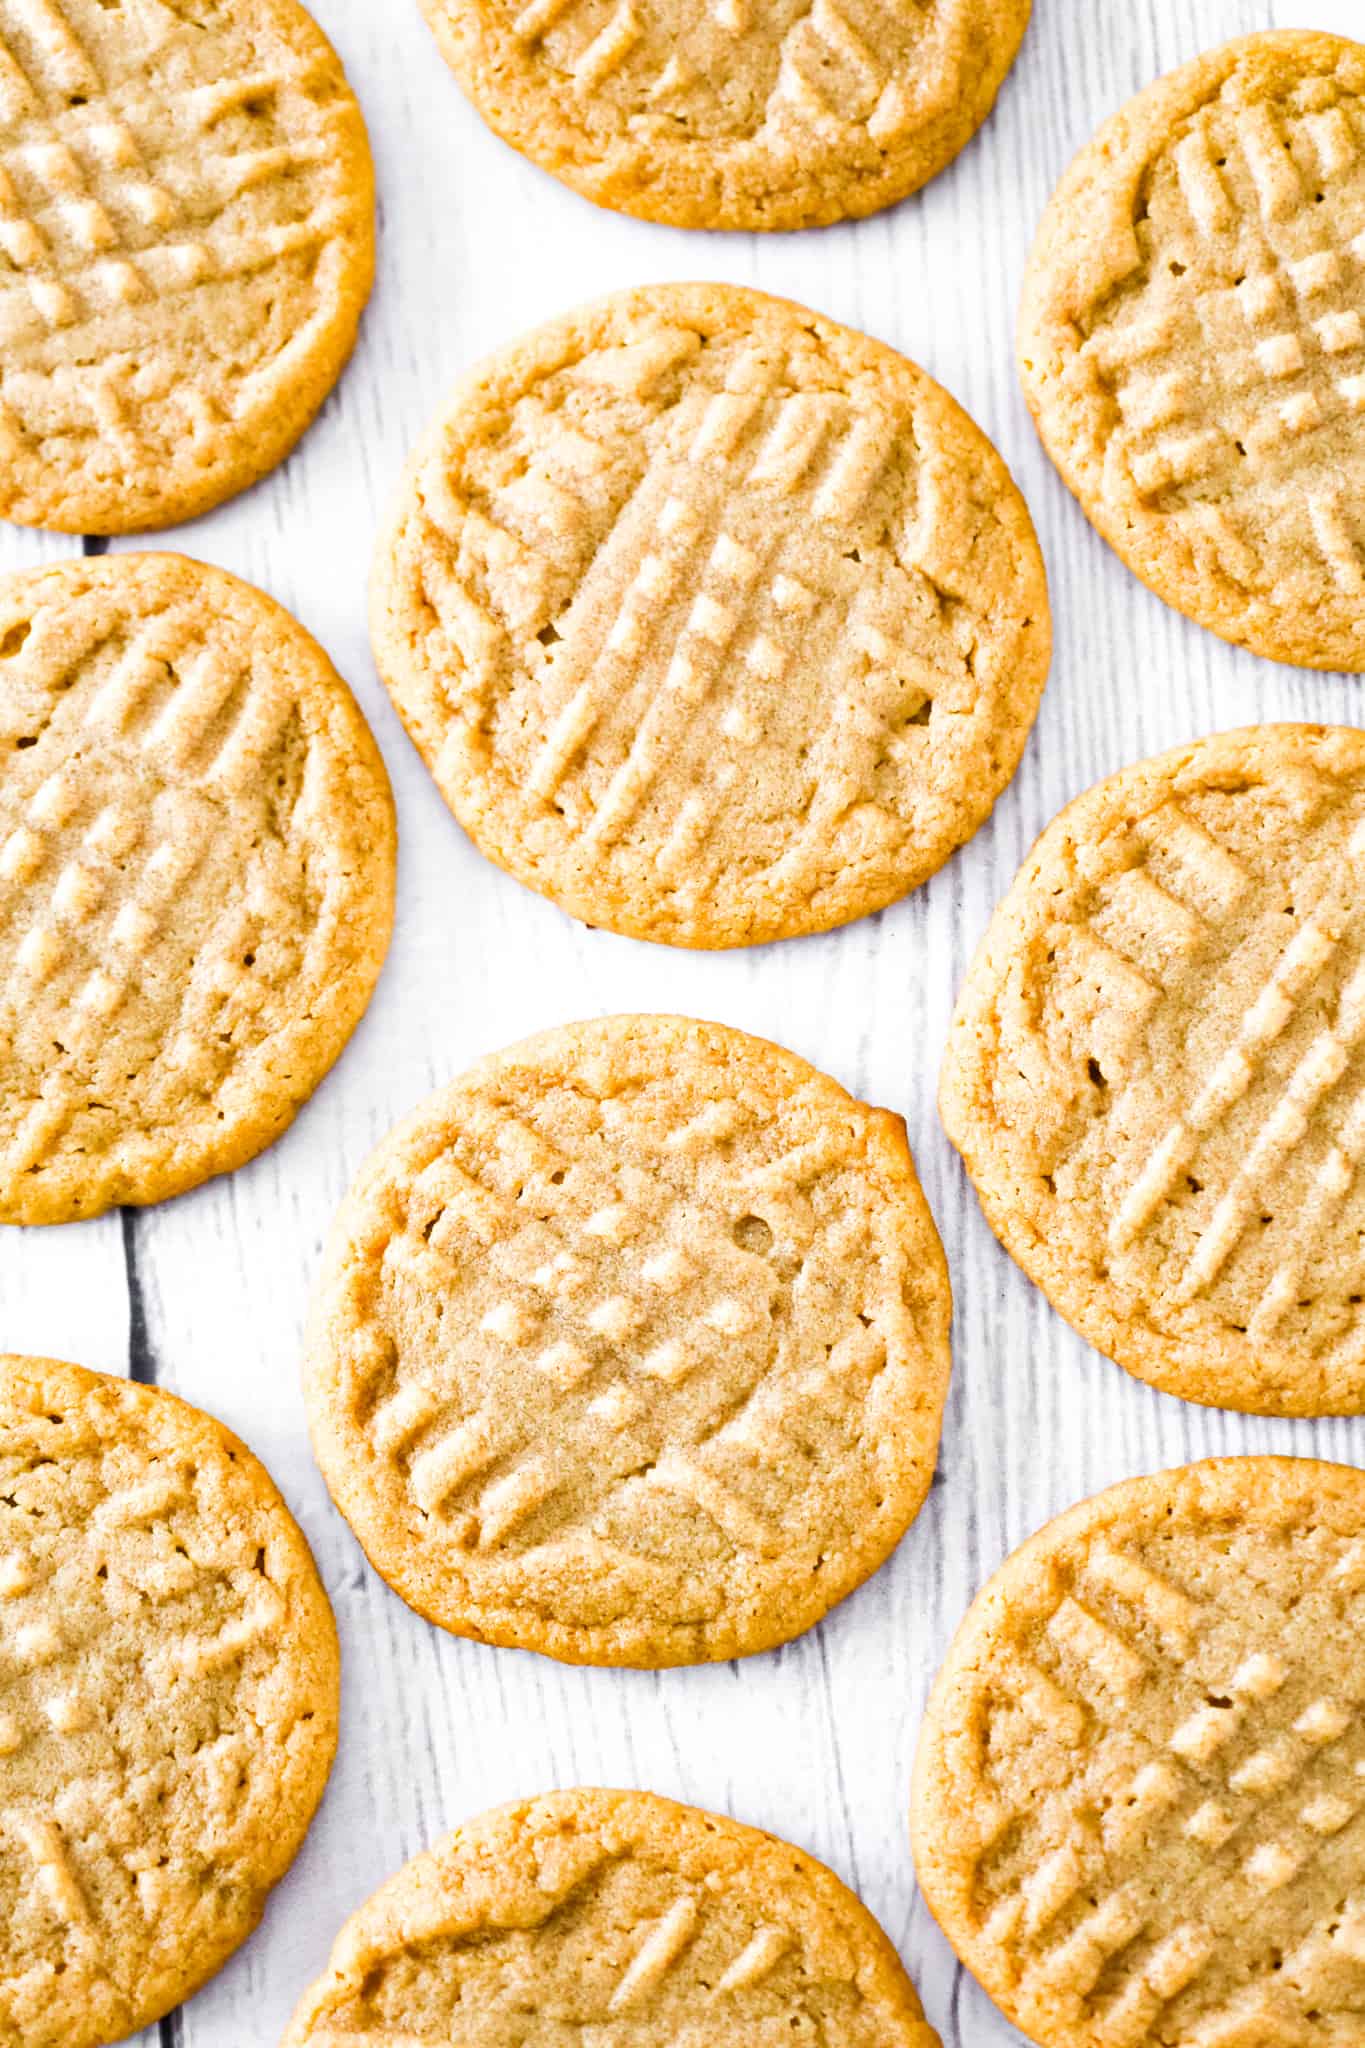 3 Ingredient Peanut Butter Cookies are chewy and delicious peanut butter cookies made using just peanut butter, brown sugar and an egg.